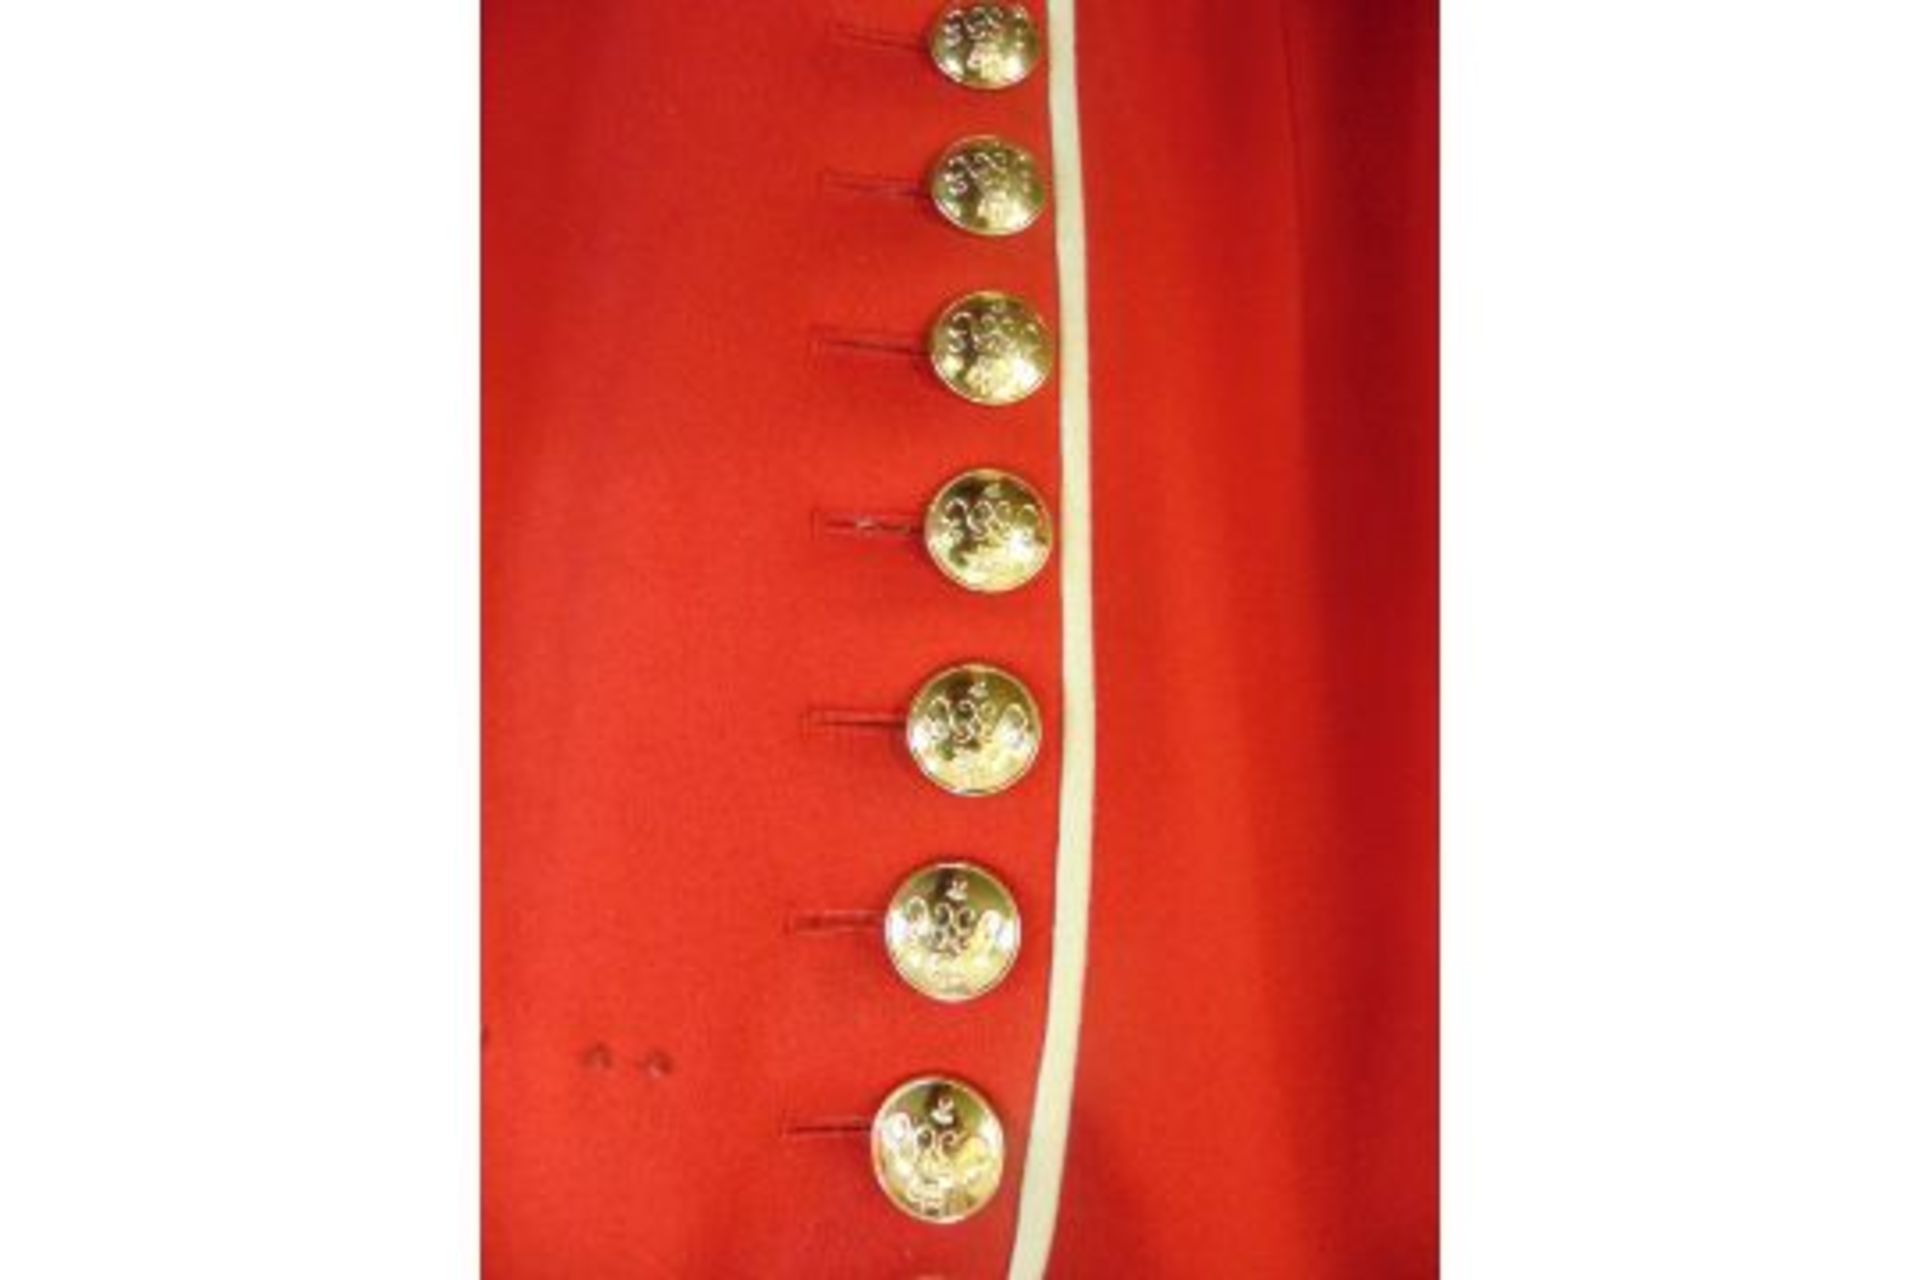 GRENADIER GUARDS DRESS TUNIC C/W BUTTONS HOUSEHOLD DIVISION - Image 2 of 7